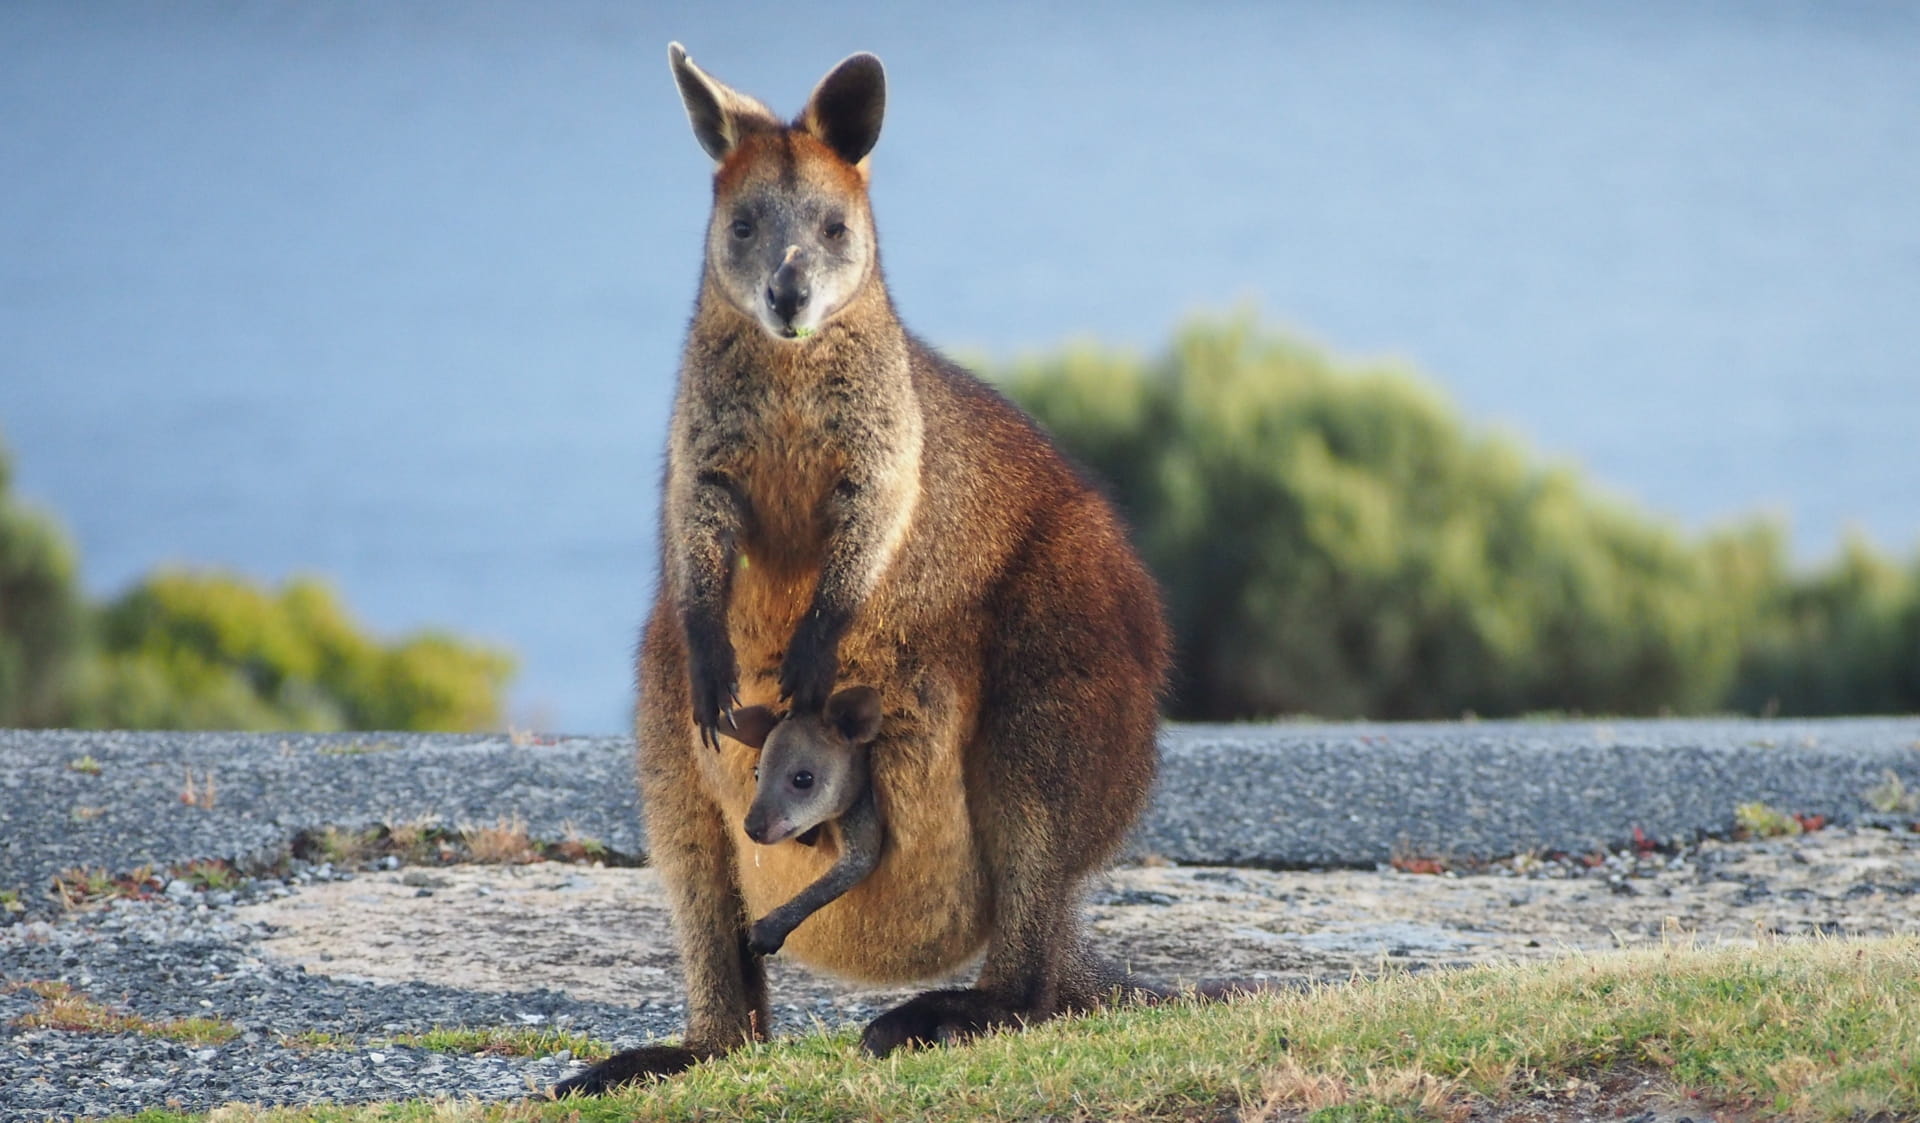 A mother and joey wallaby on a rock surface with the ocean in the background at Wilsons Promontory National Park.